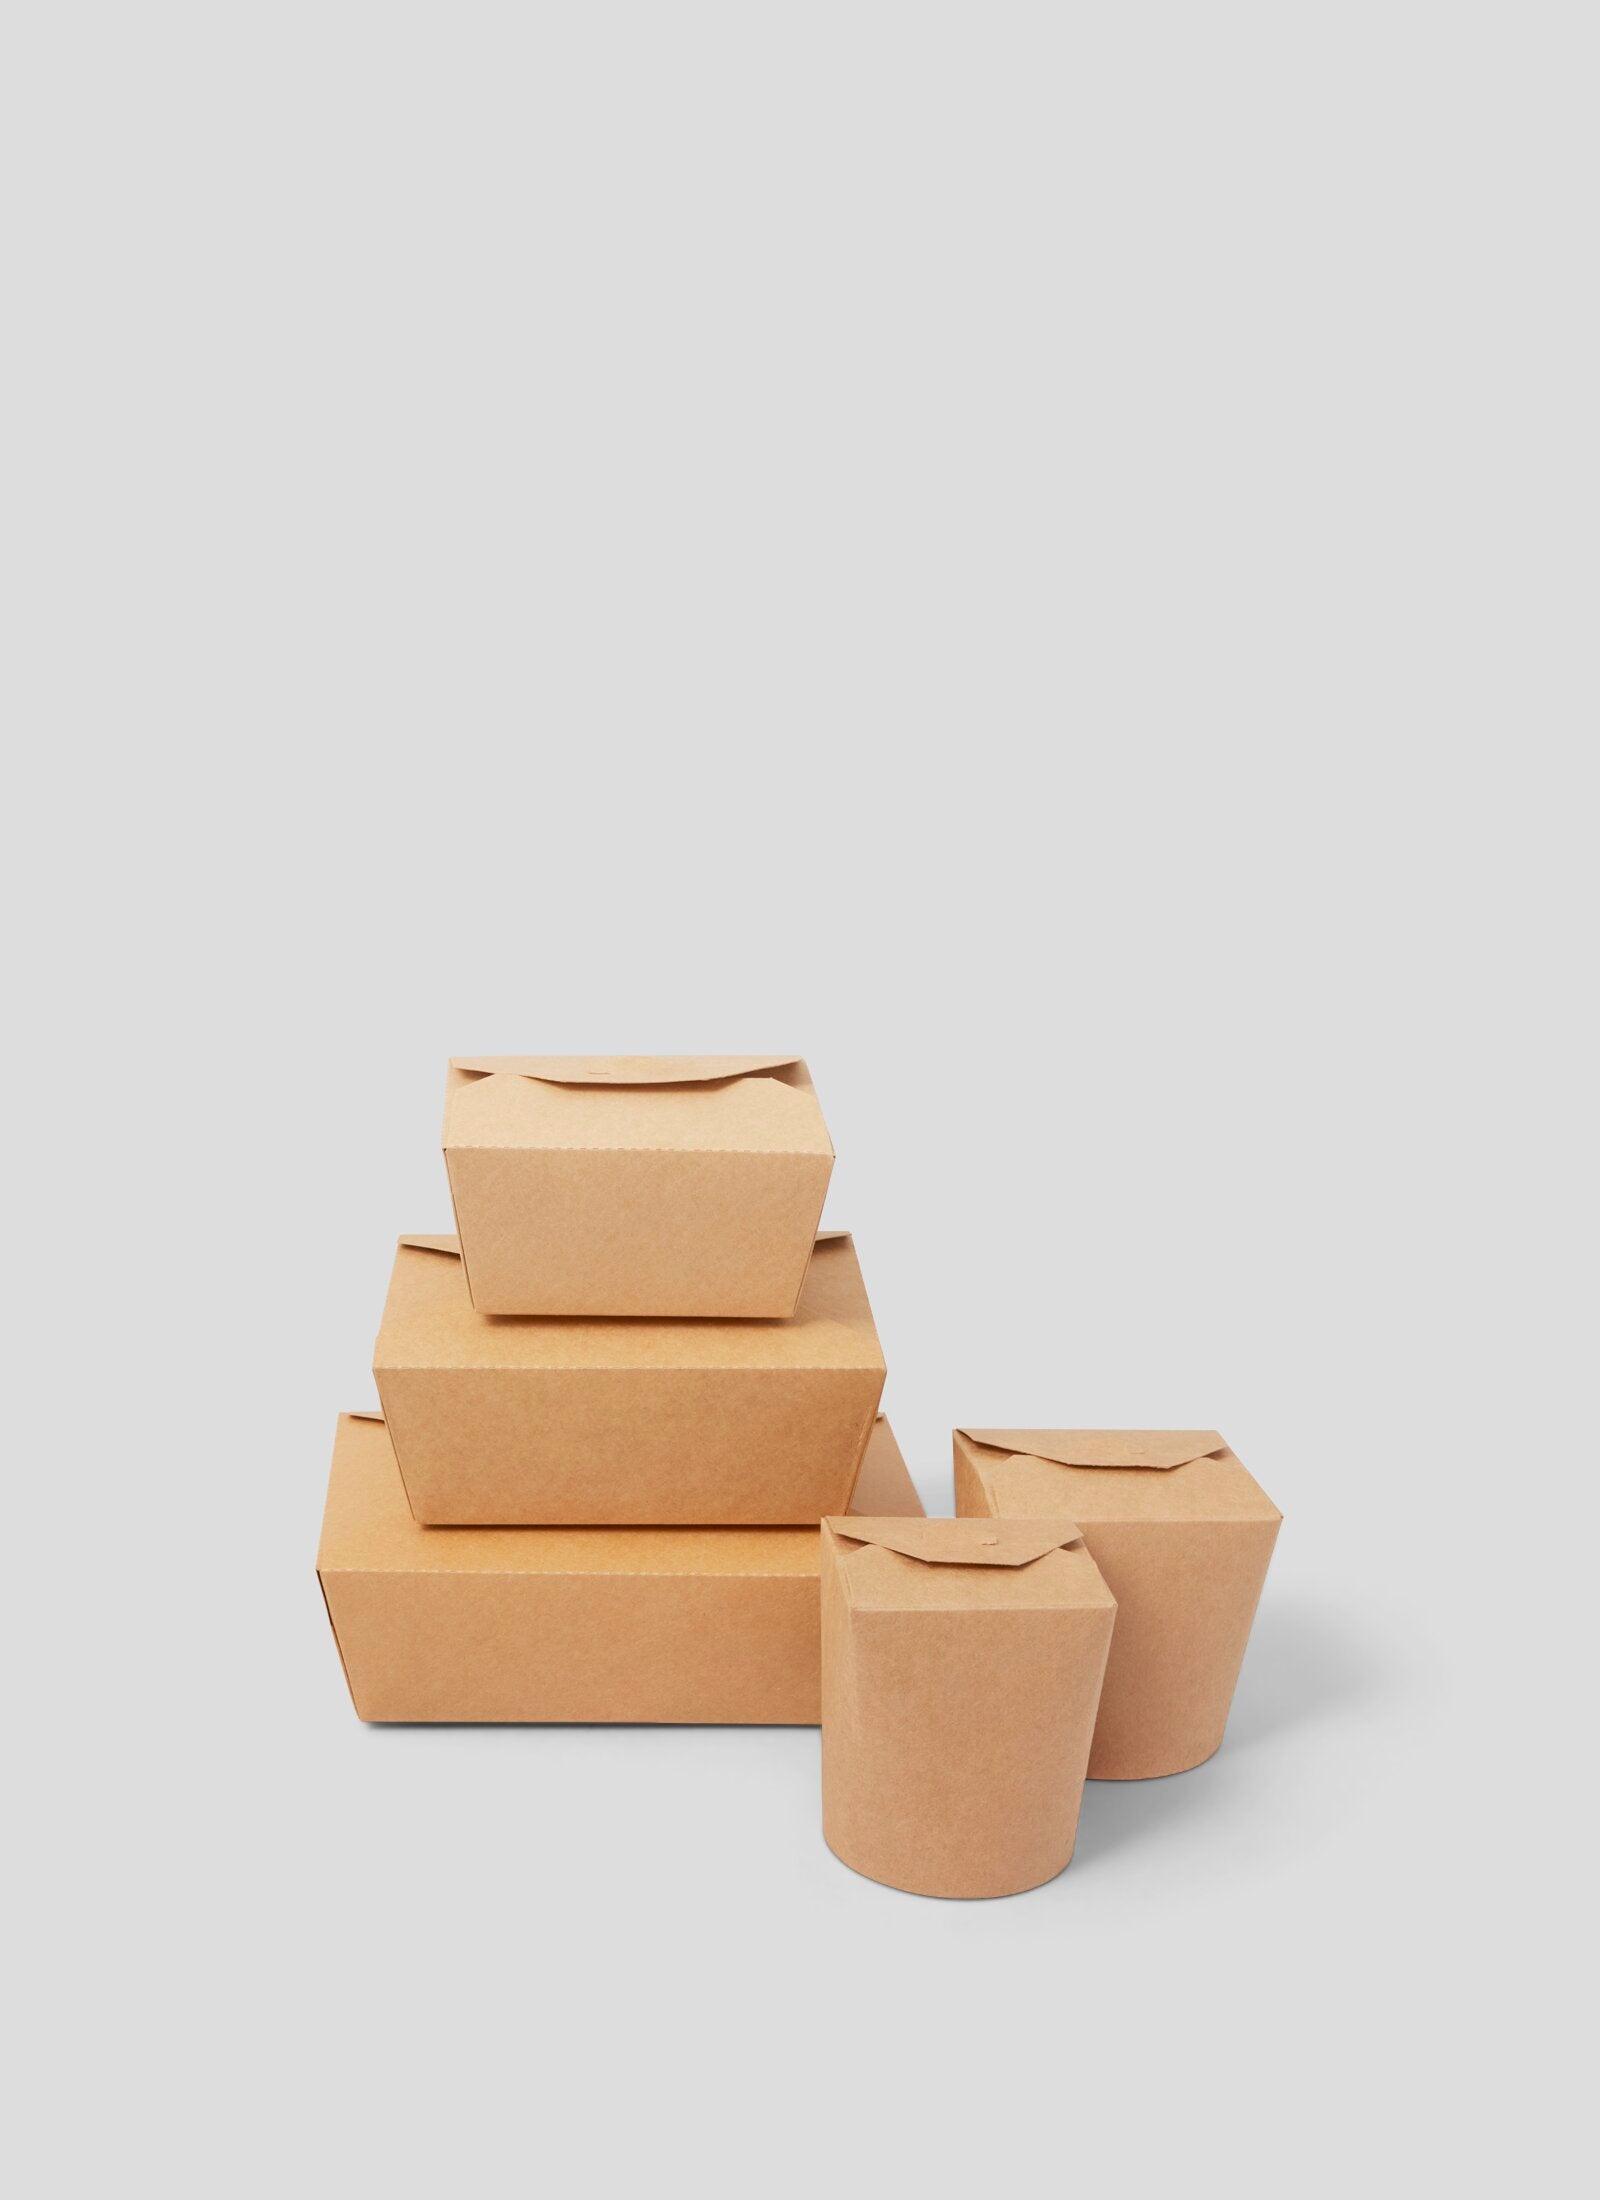 Bento and noodle box from Soyle Sustainable Packaging